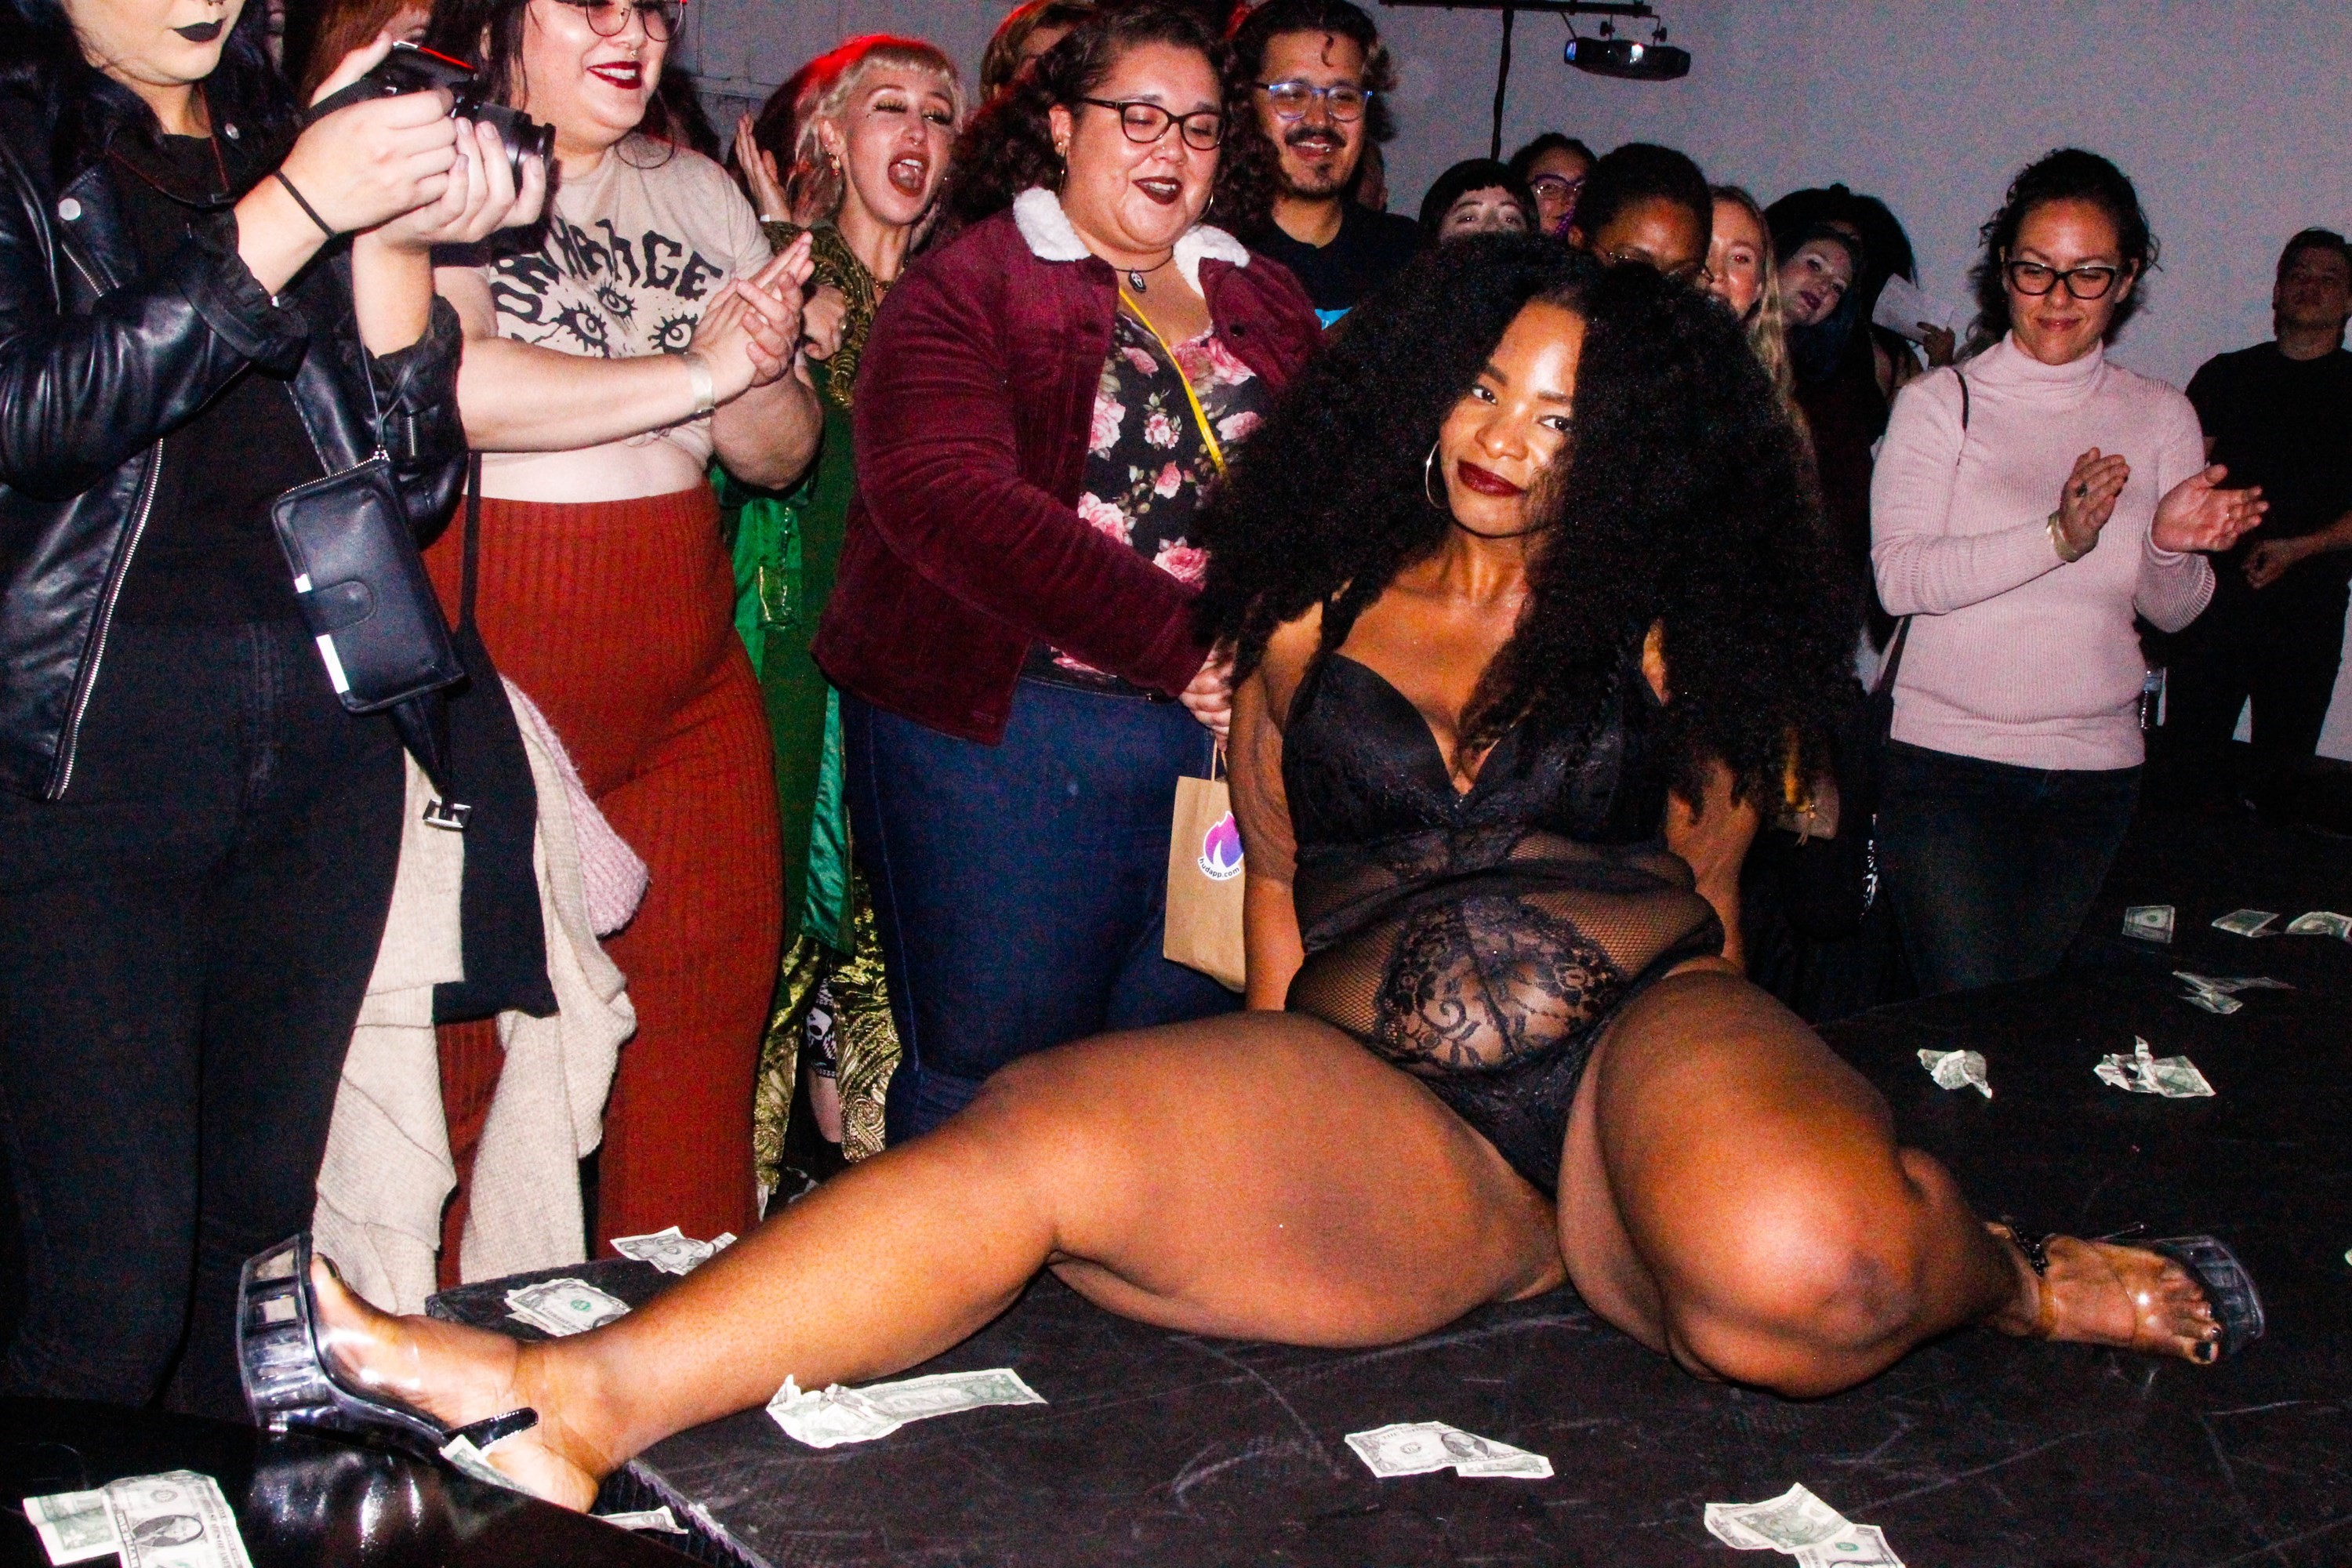 The body positive LA strip show founded by plus size women Dazed picture image